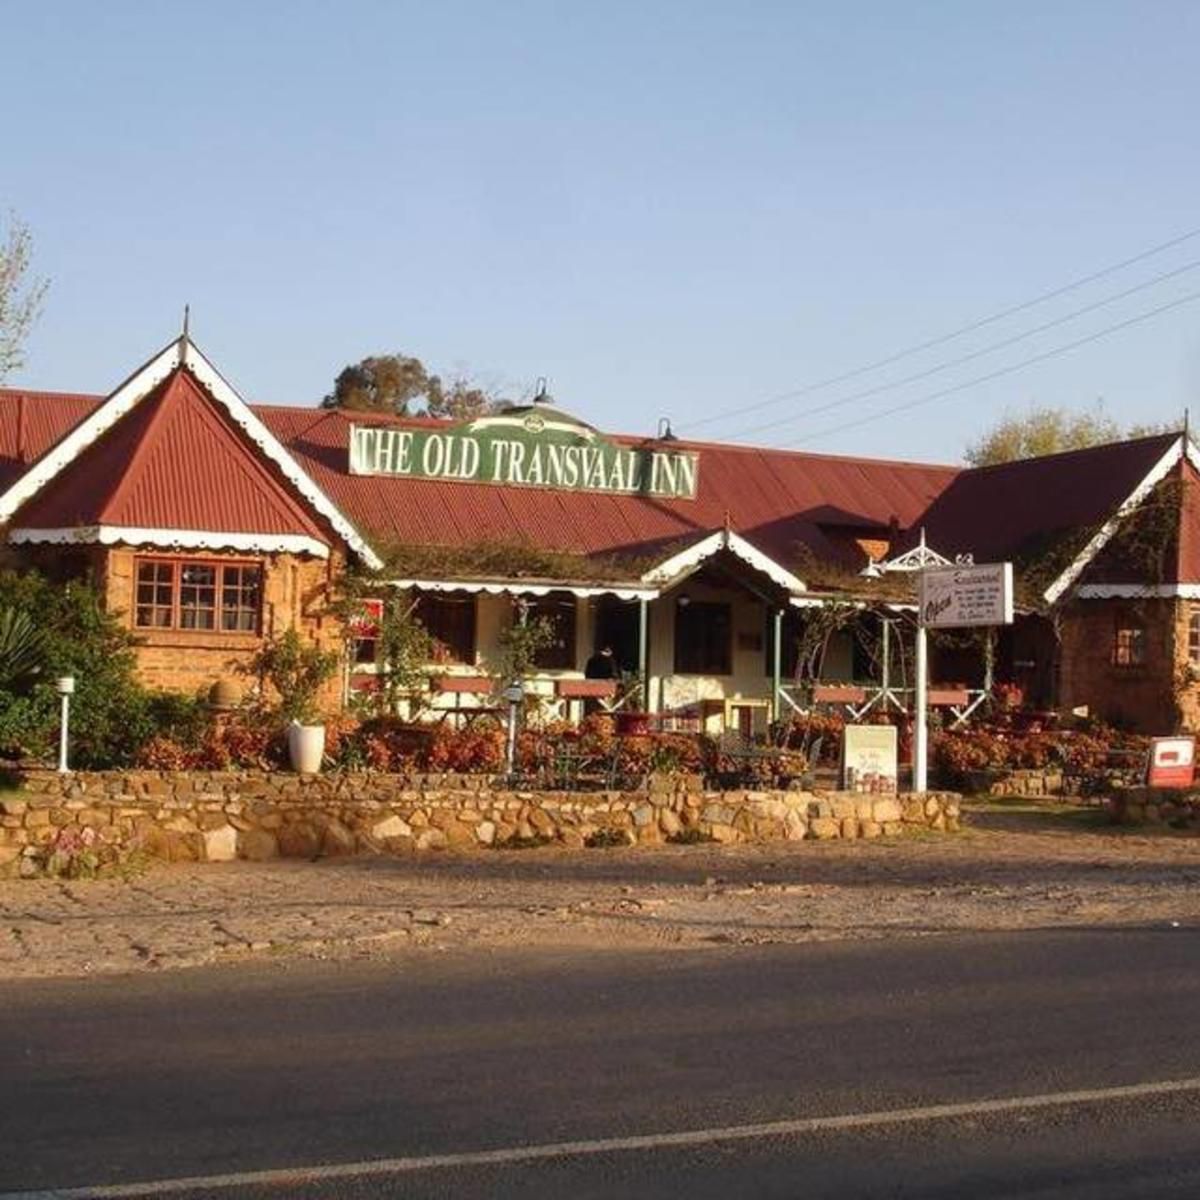 Old Transvaal Inn Accommodation Dullstroom Mpumalanga South Africa Complementary Colors, Barn, Building, Architecture, Agriculture, Wood, Bar